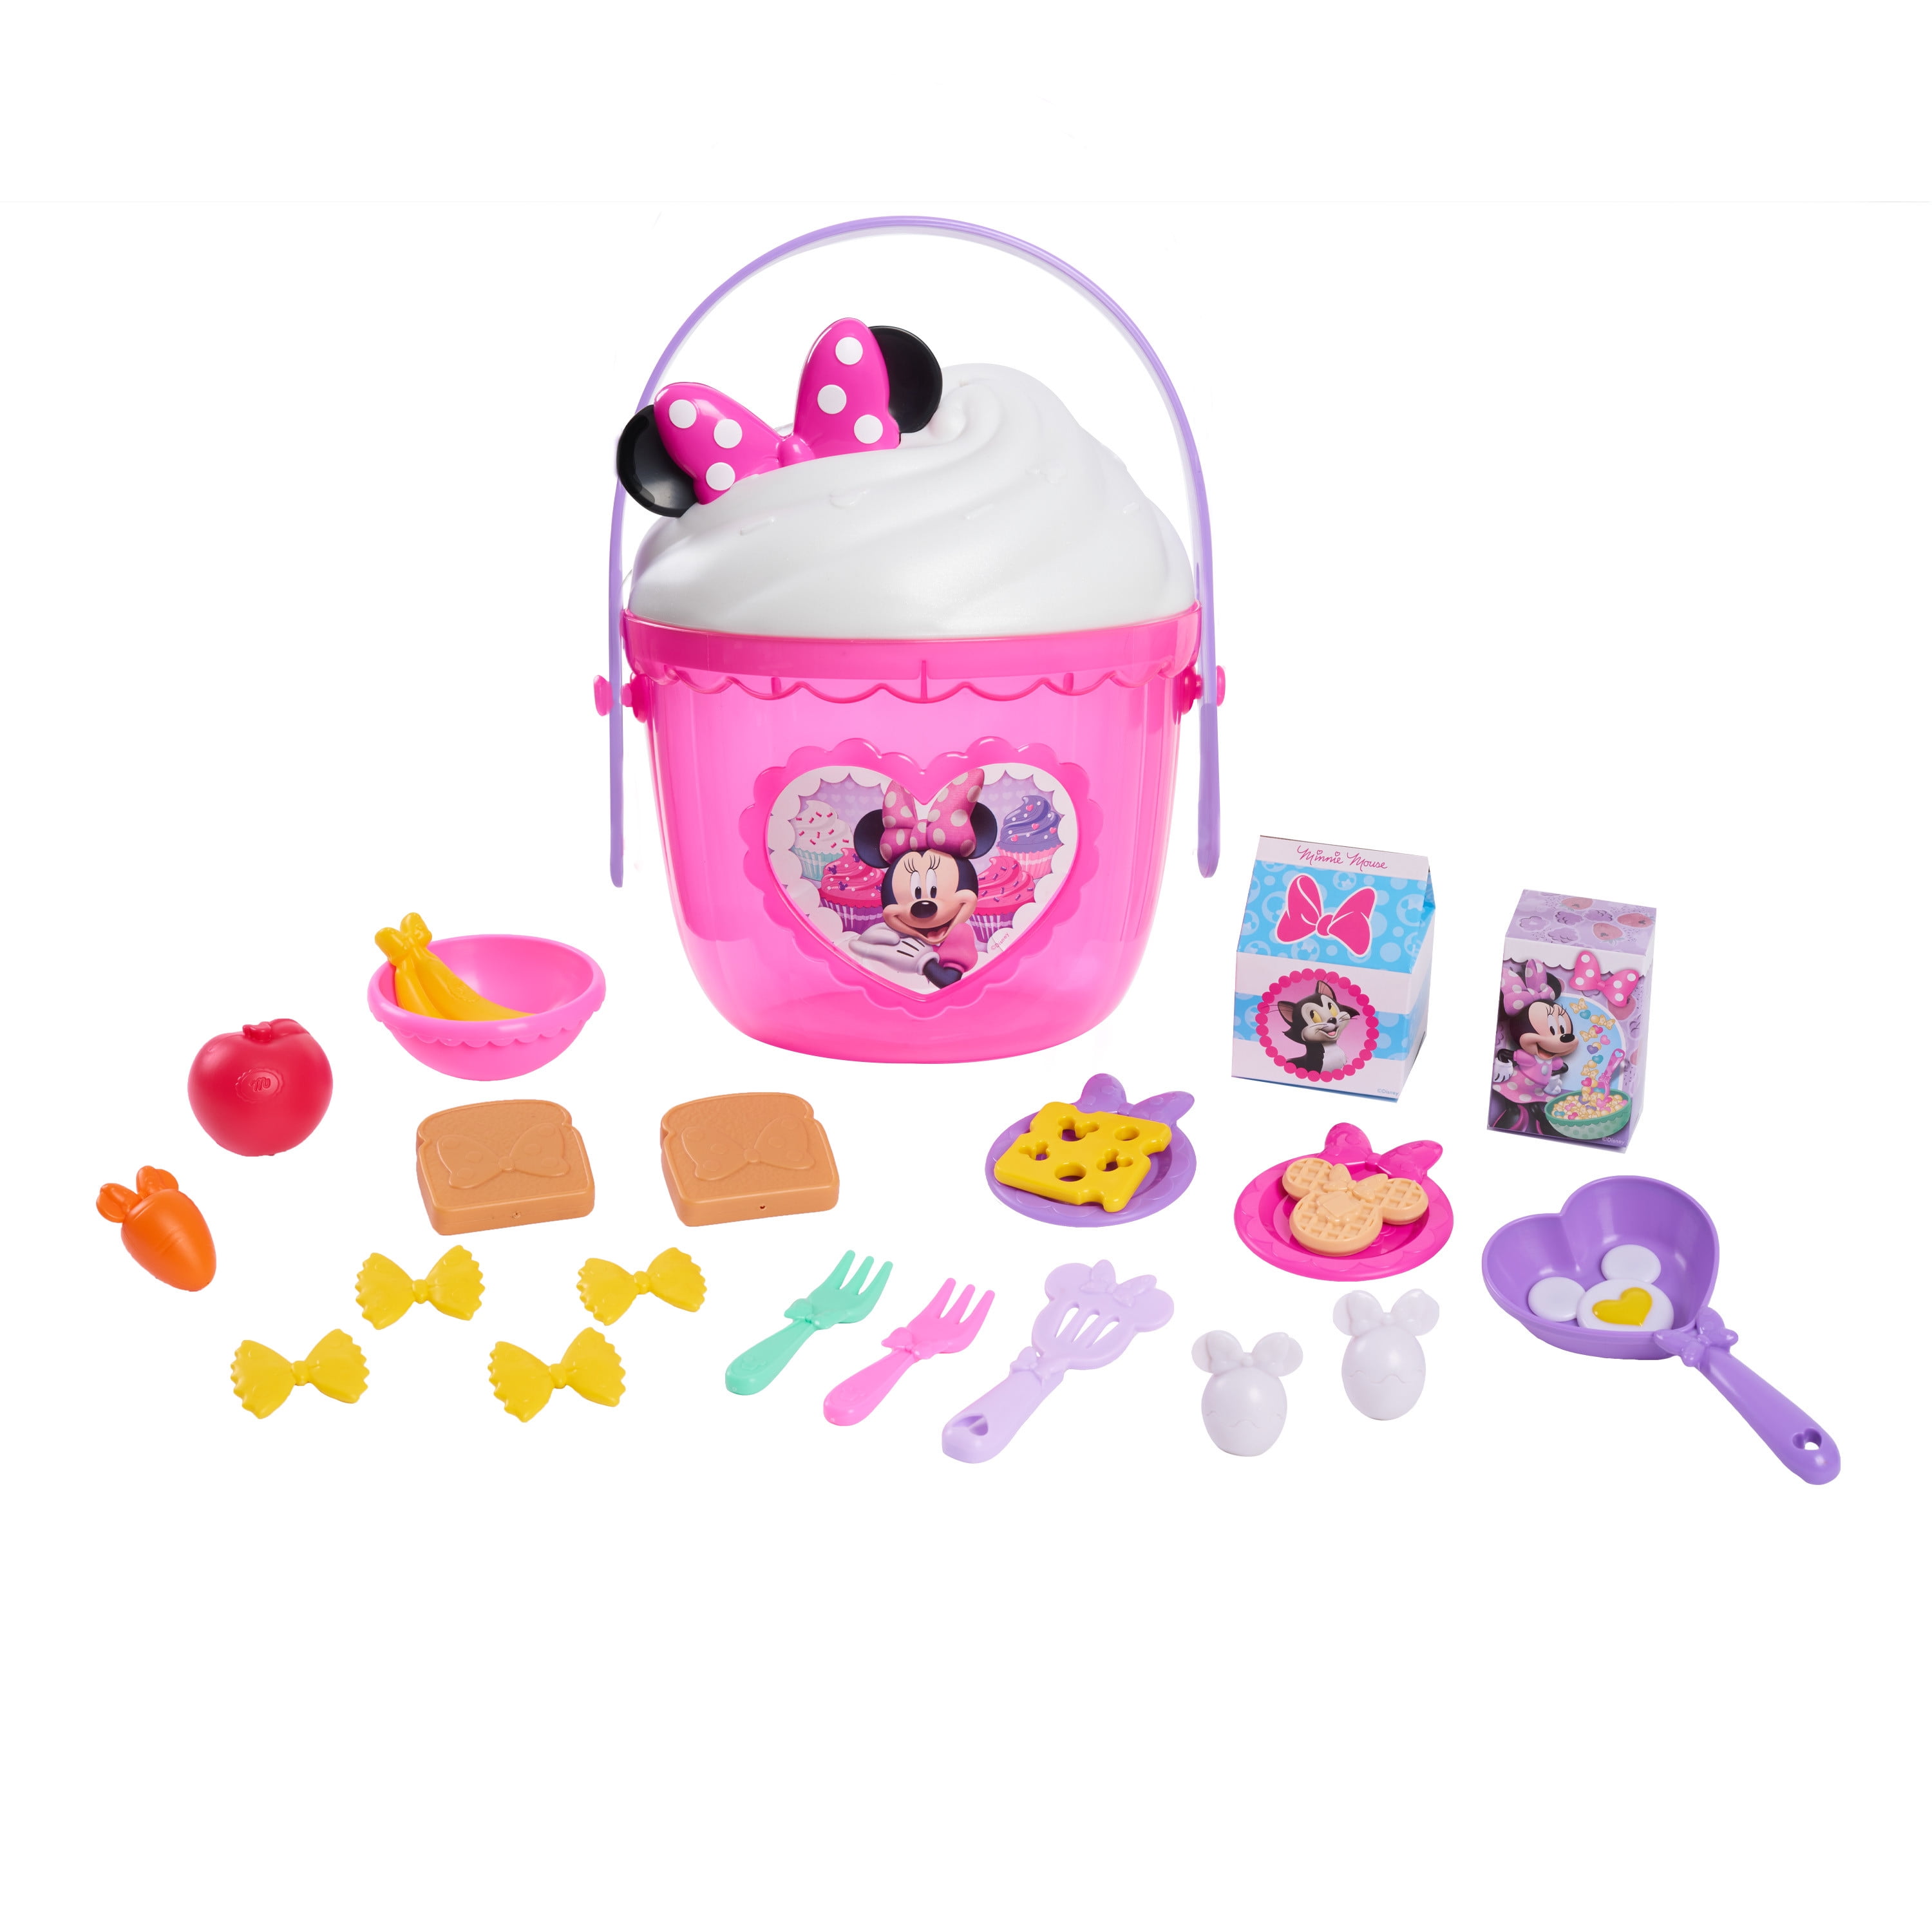 Disney Junior Minnie Mouse Fab Food Bucket, 25-pieces, Pretend Kitchen Playset, Officially Licensed Kids Toys for Ages 3 Up, Gifts and Presents